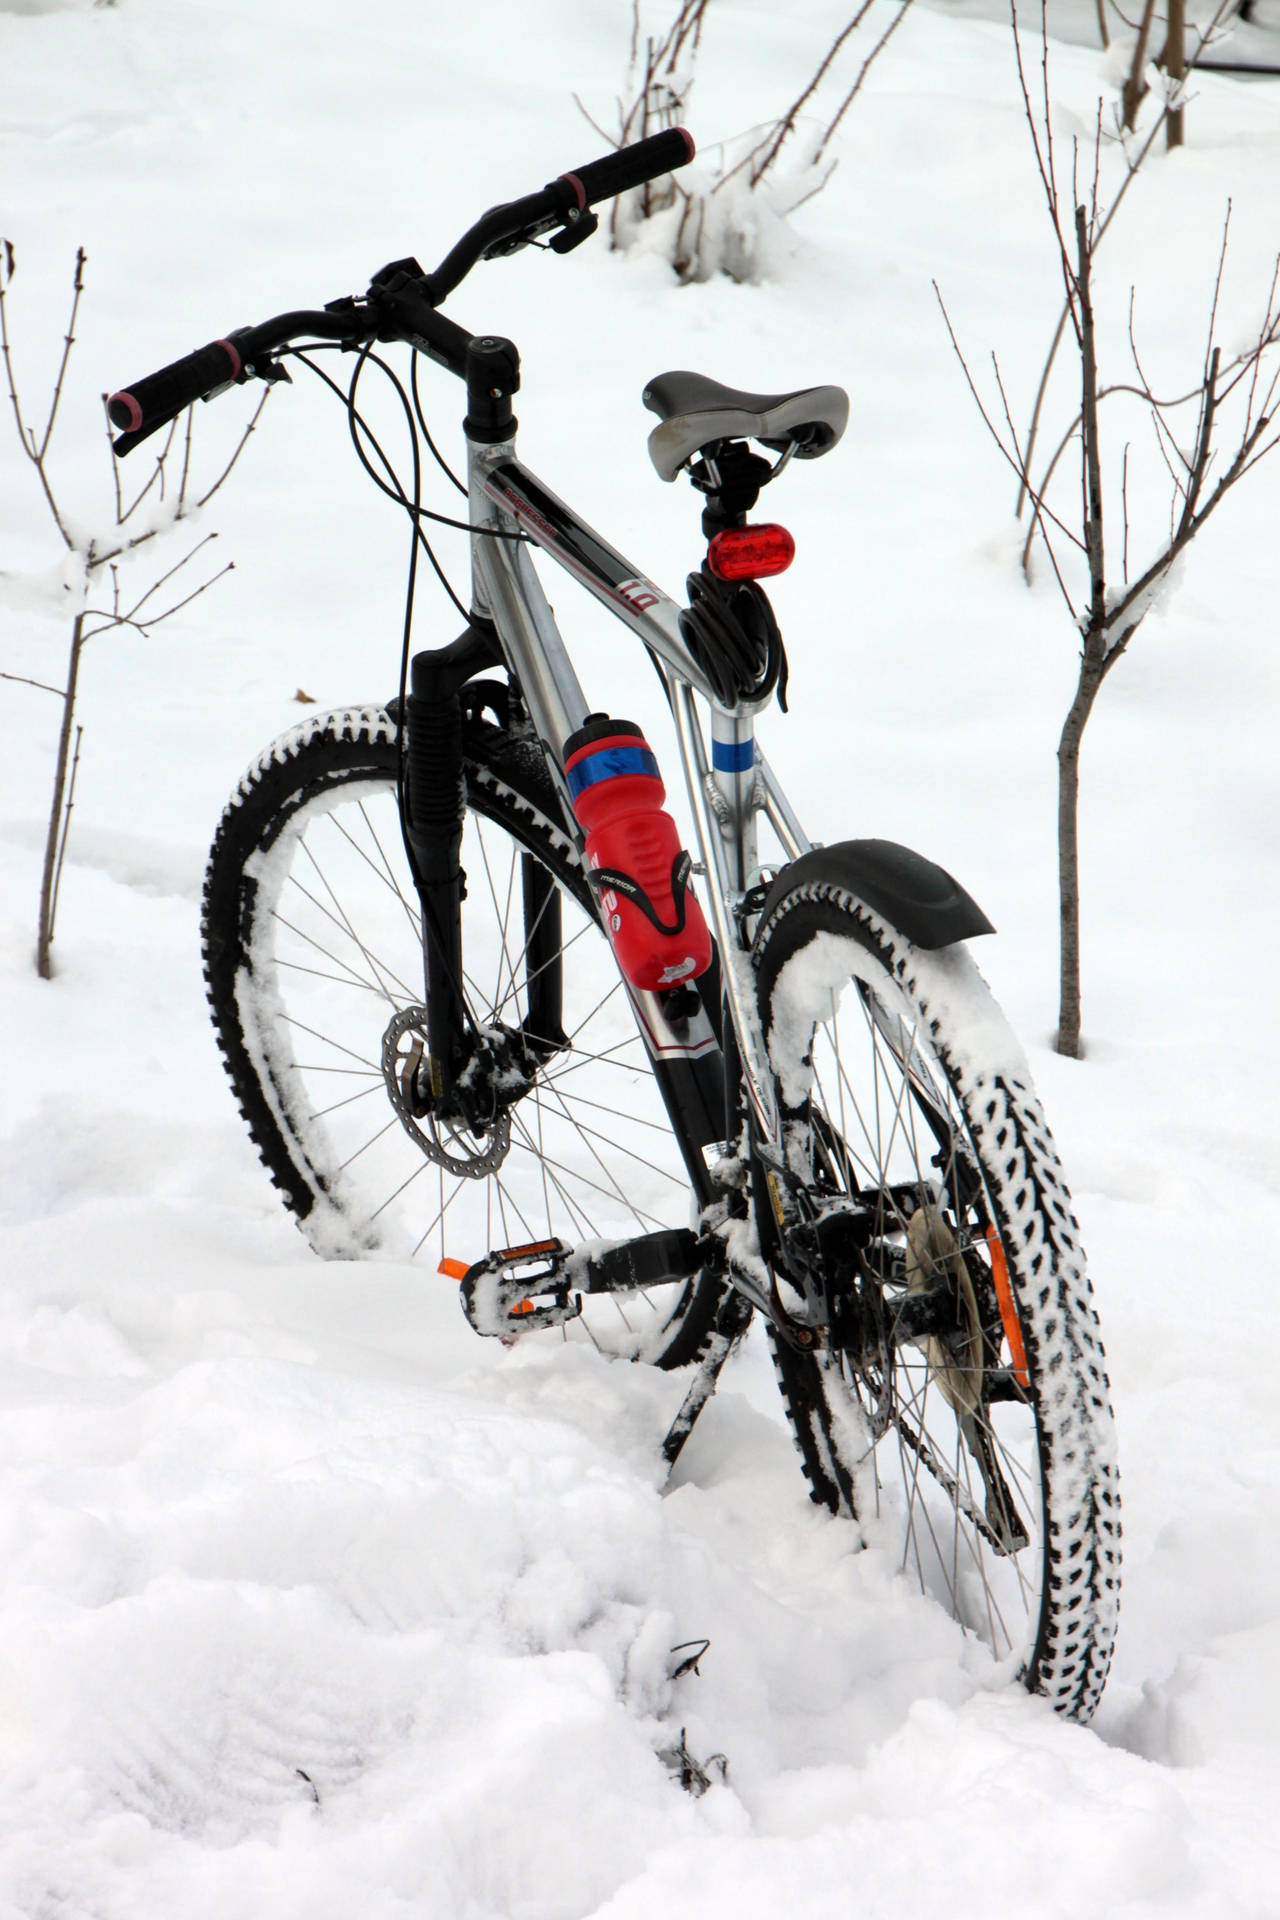 Mountain Bike 3168X4752 Wallpaper and Background Image